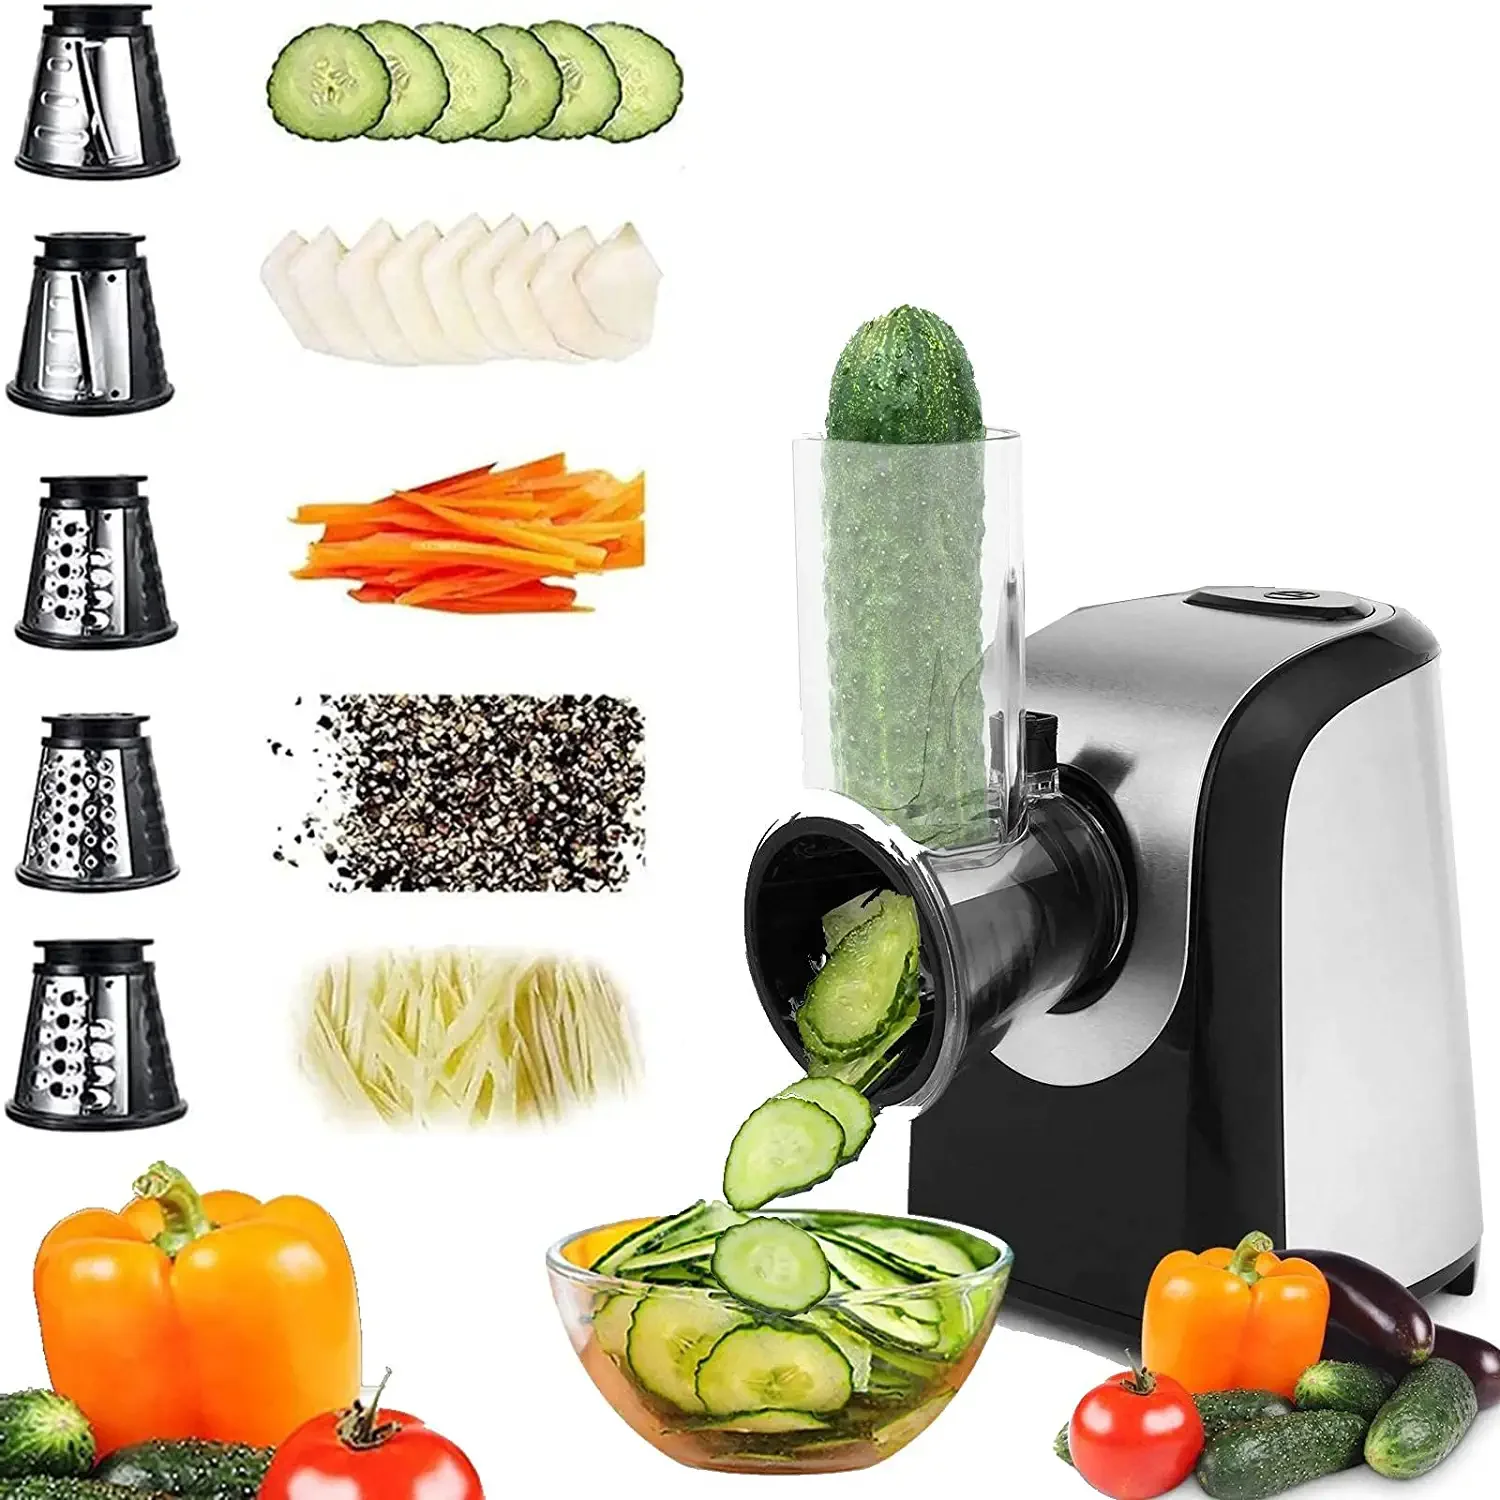 Electric Cheese Grater, Professional Salad Shooter Electric Slicer